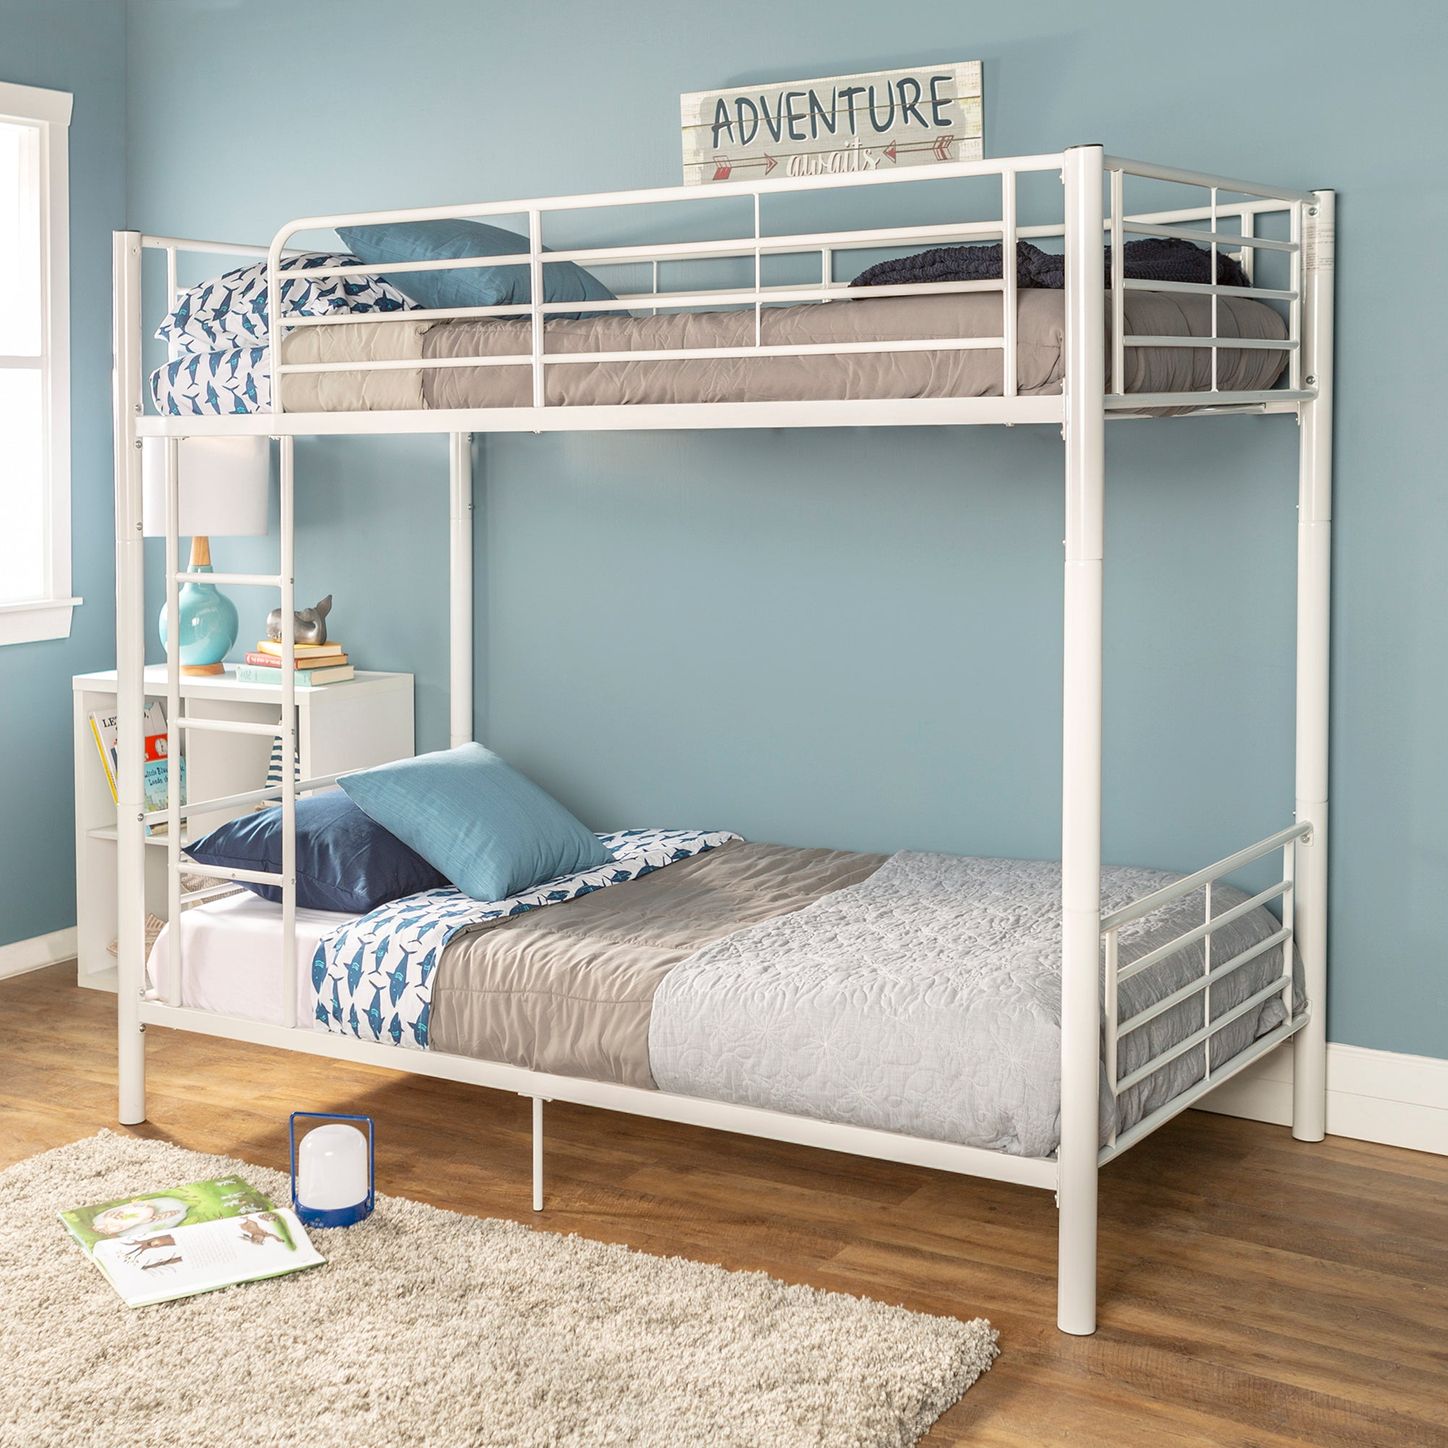 5 Best Bunk Beds 22 The Strategist